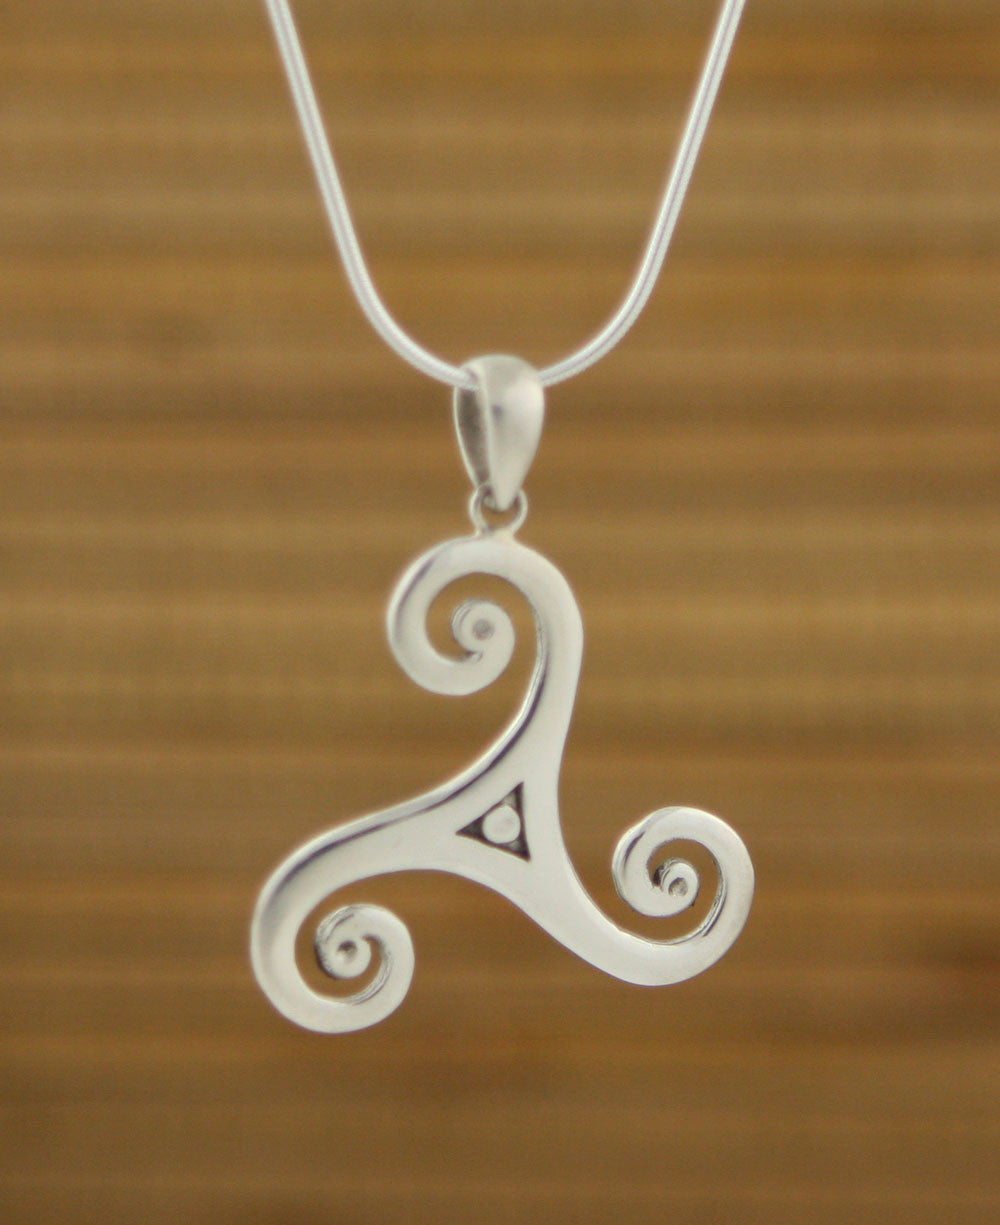 Sterling Silver Triskelion Celtic Pendant. Available at https://www.culturalelements.com/products/sterling-silver-celtic-triskele-pendant